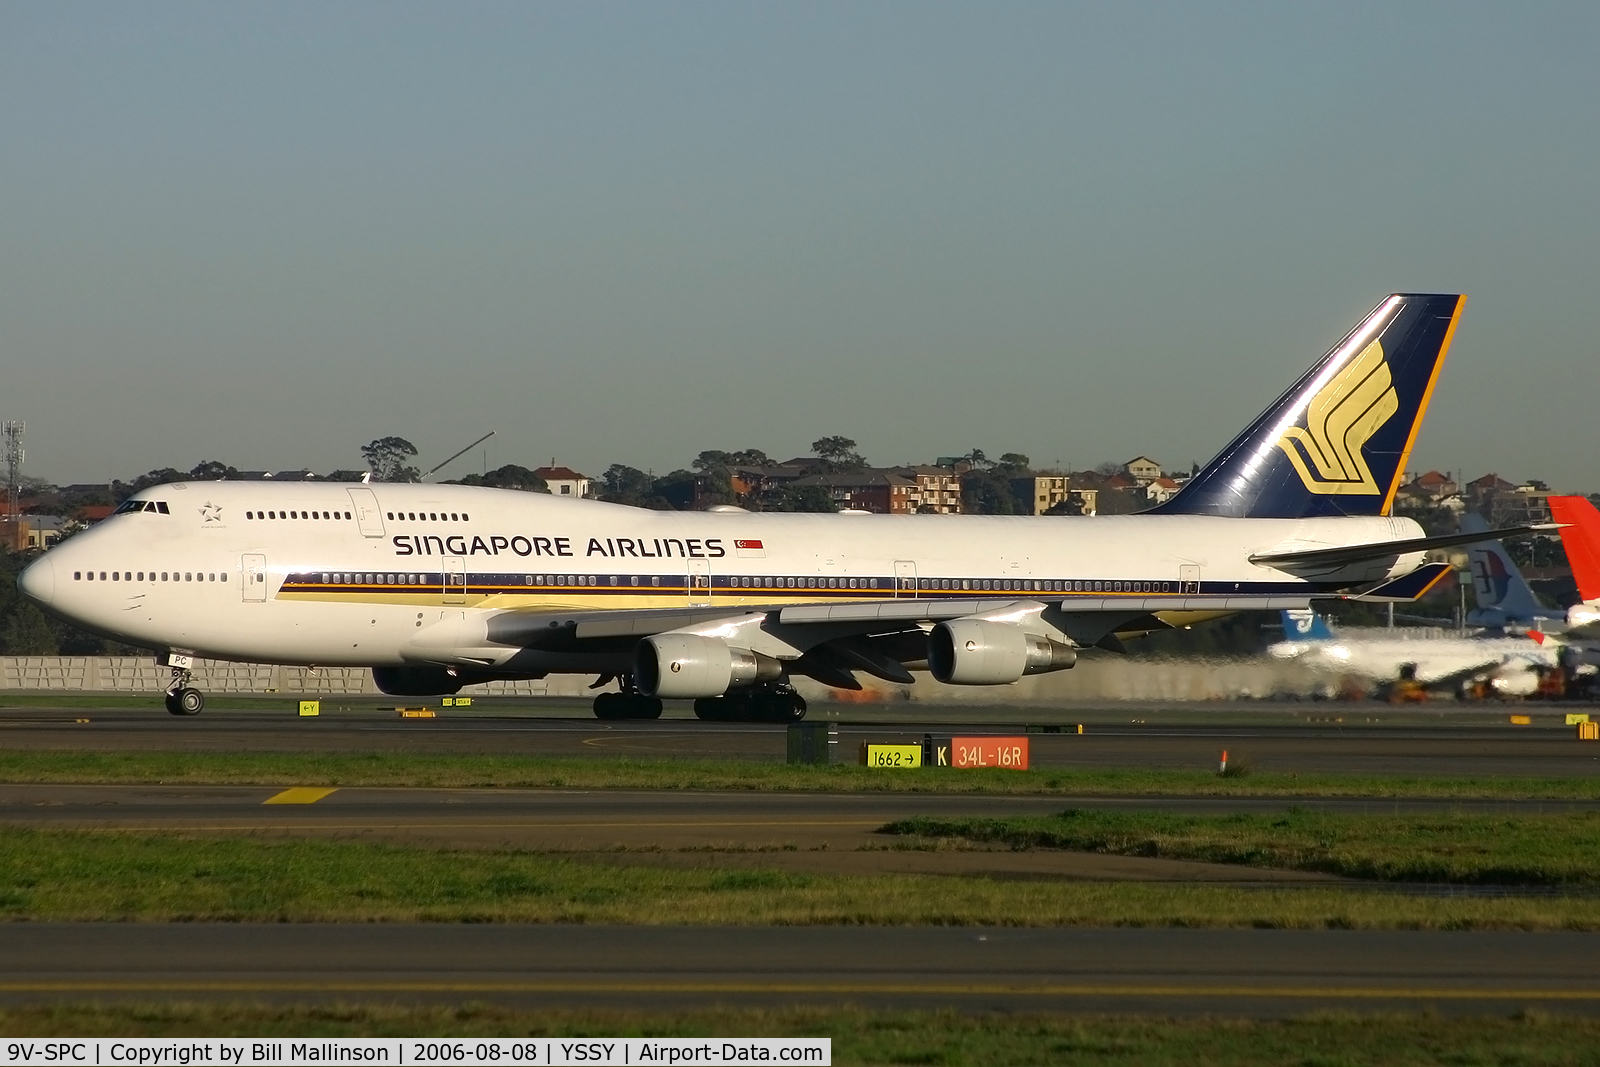 9V-SPC, 1994 Boeing 747-412 C/N 27070, taxi to 34L for return to SIN